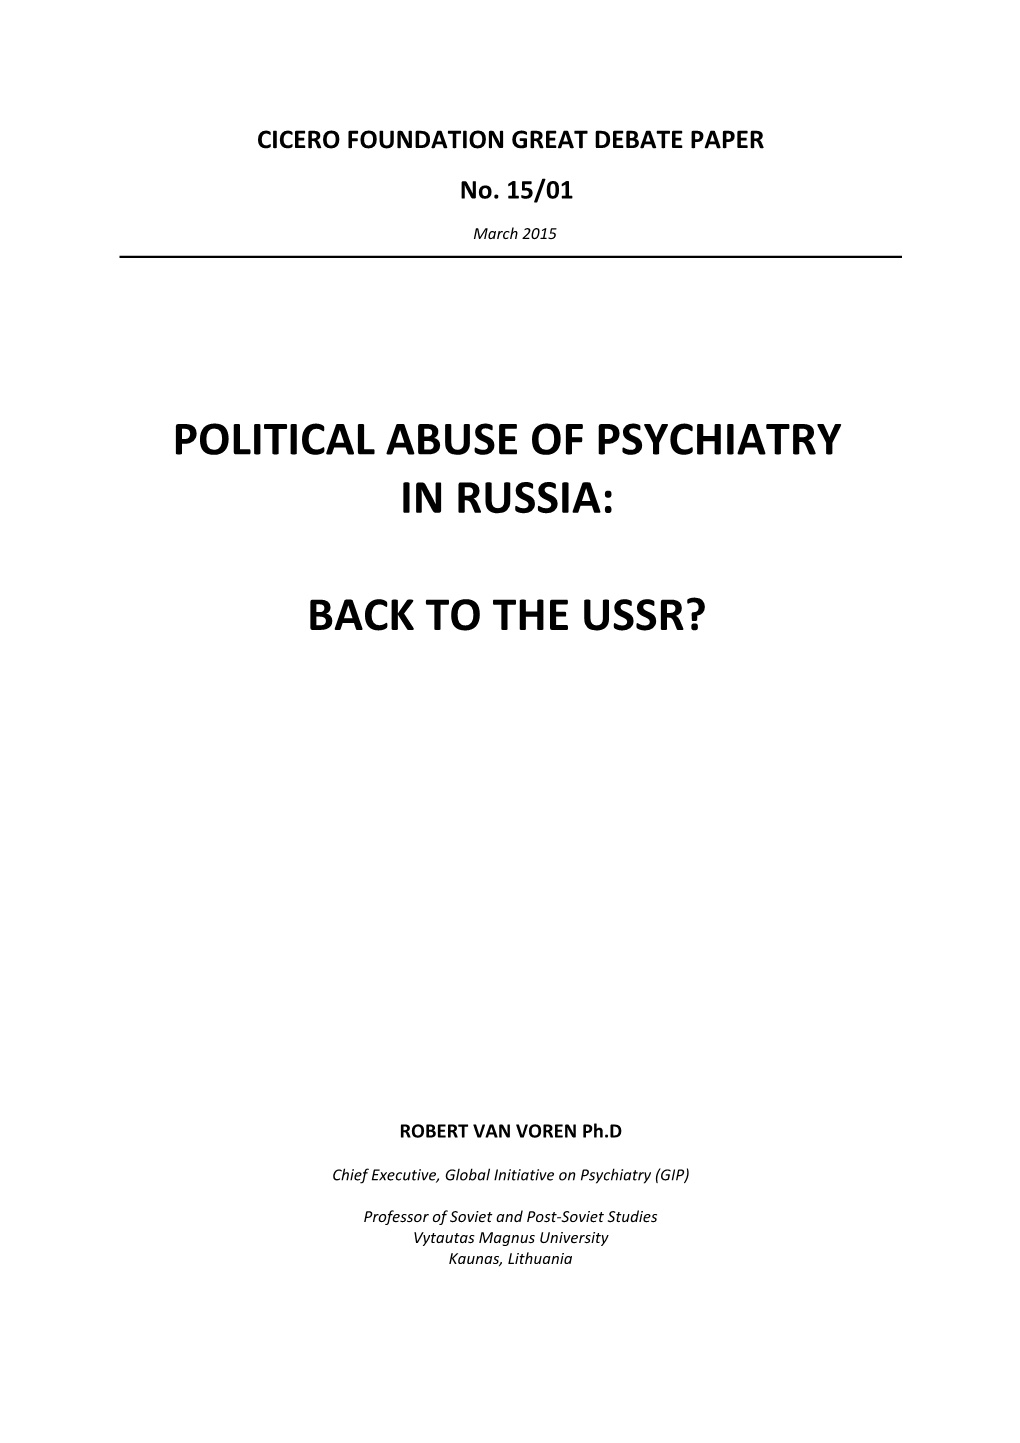 Political Abuse of Psychiatry in Russia